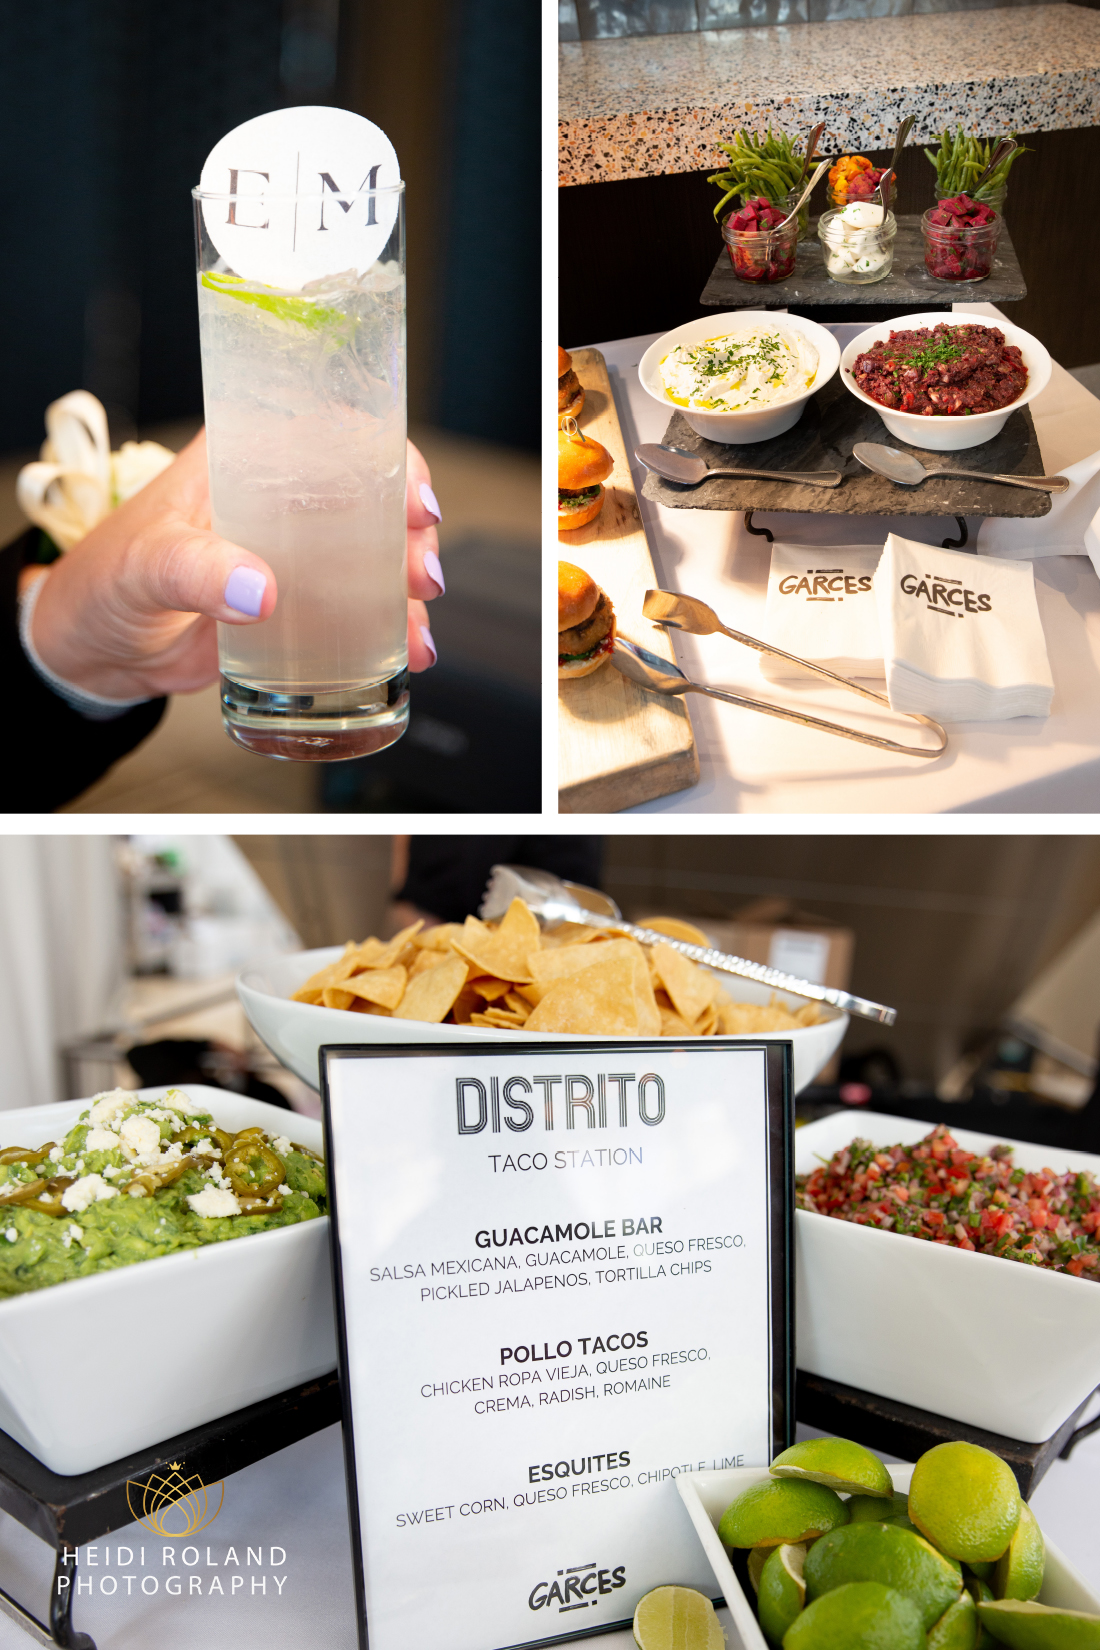 Cocktail and taco offerings by distrito taco in philadelphia wedding